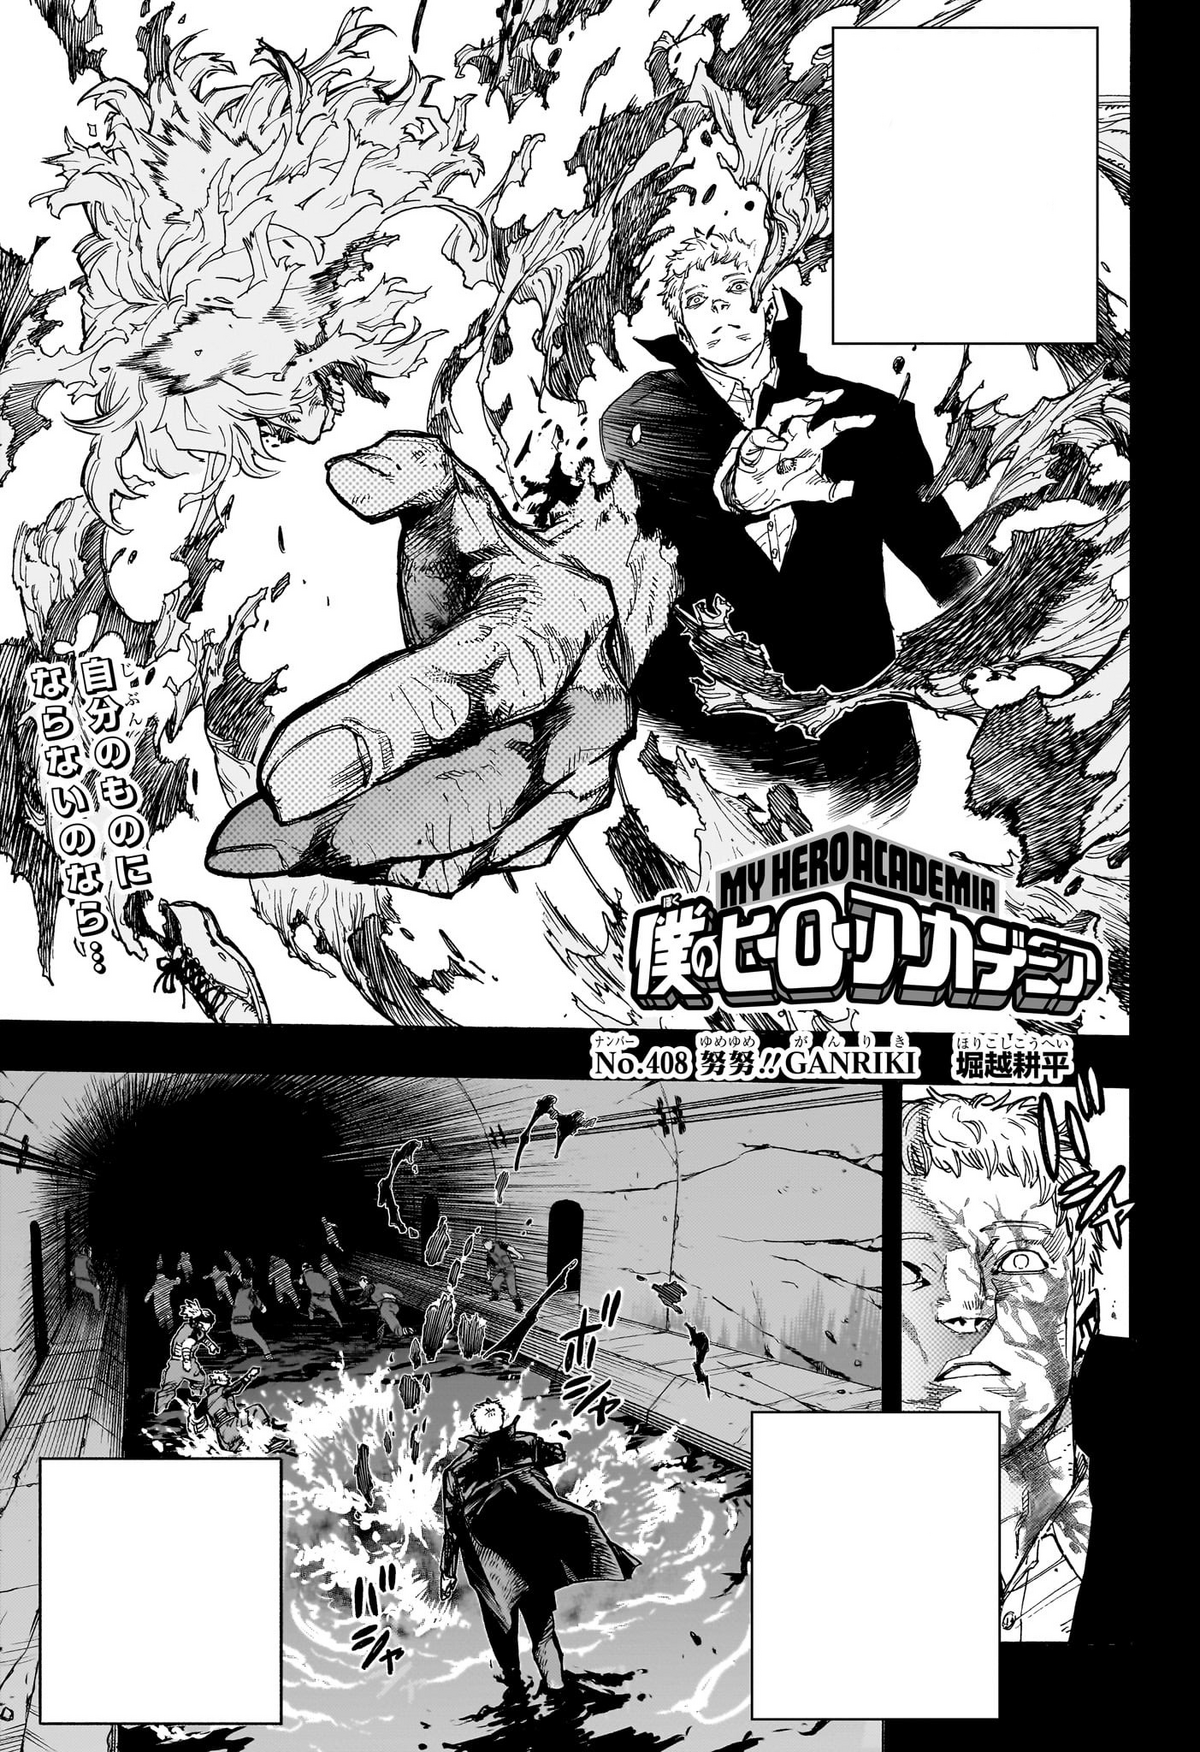 My Hero Academia chapter 408: All For One uses his ultimate attack